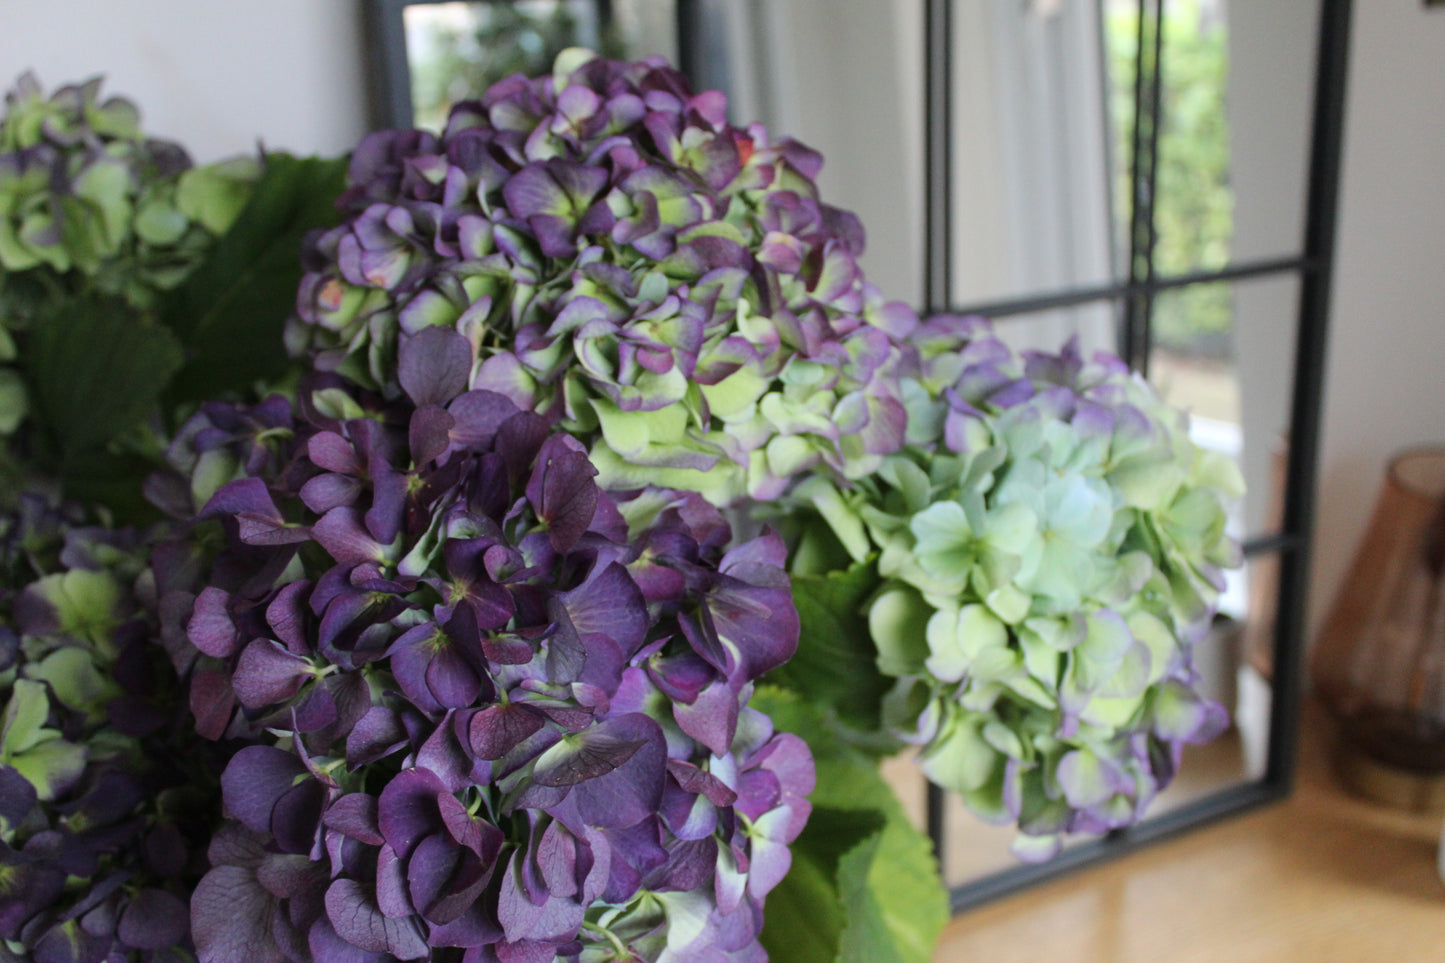 How To Look After Your Hydrangeas